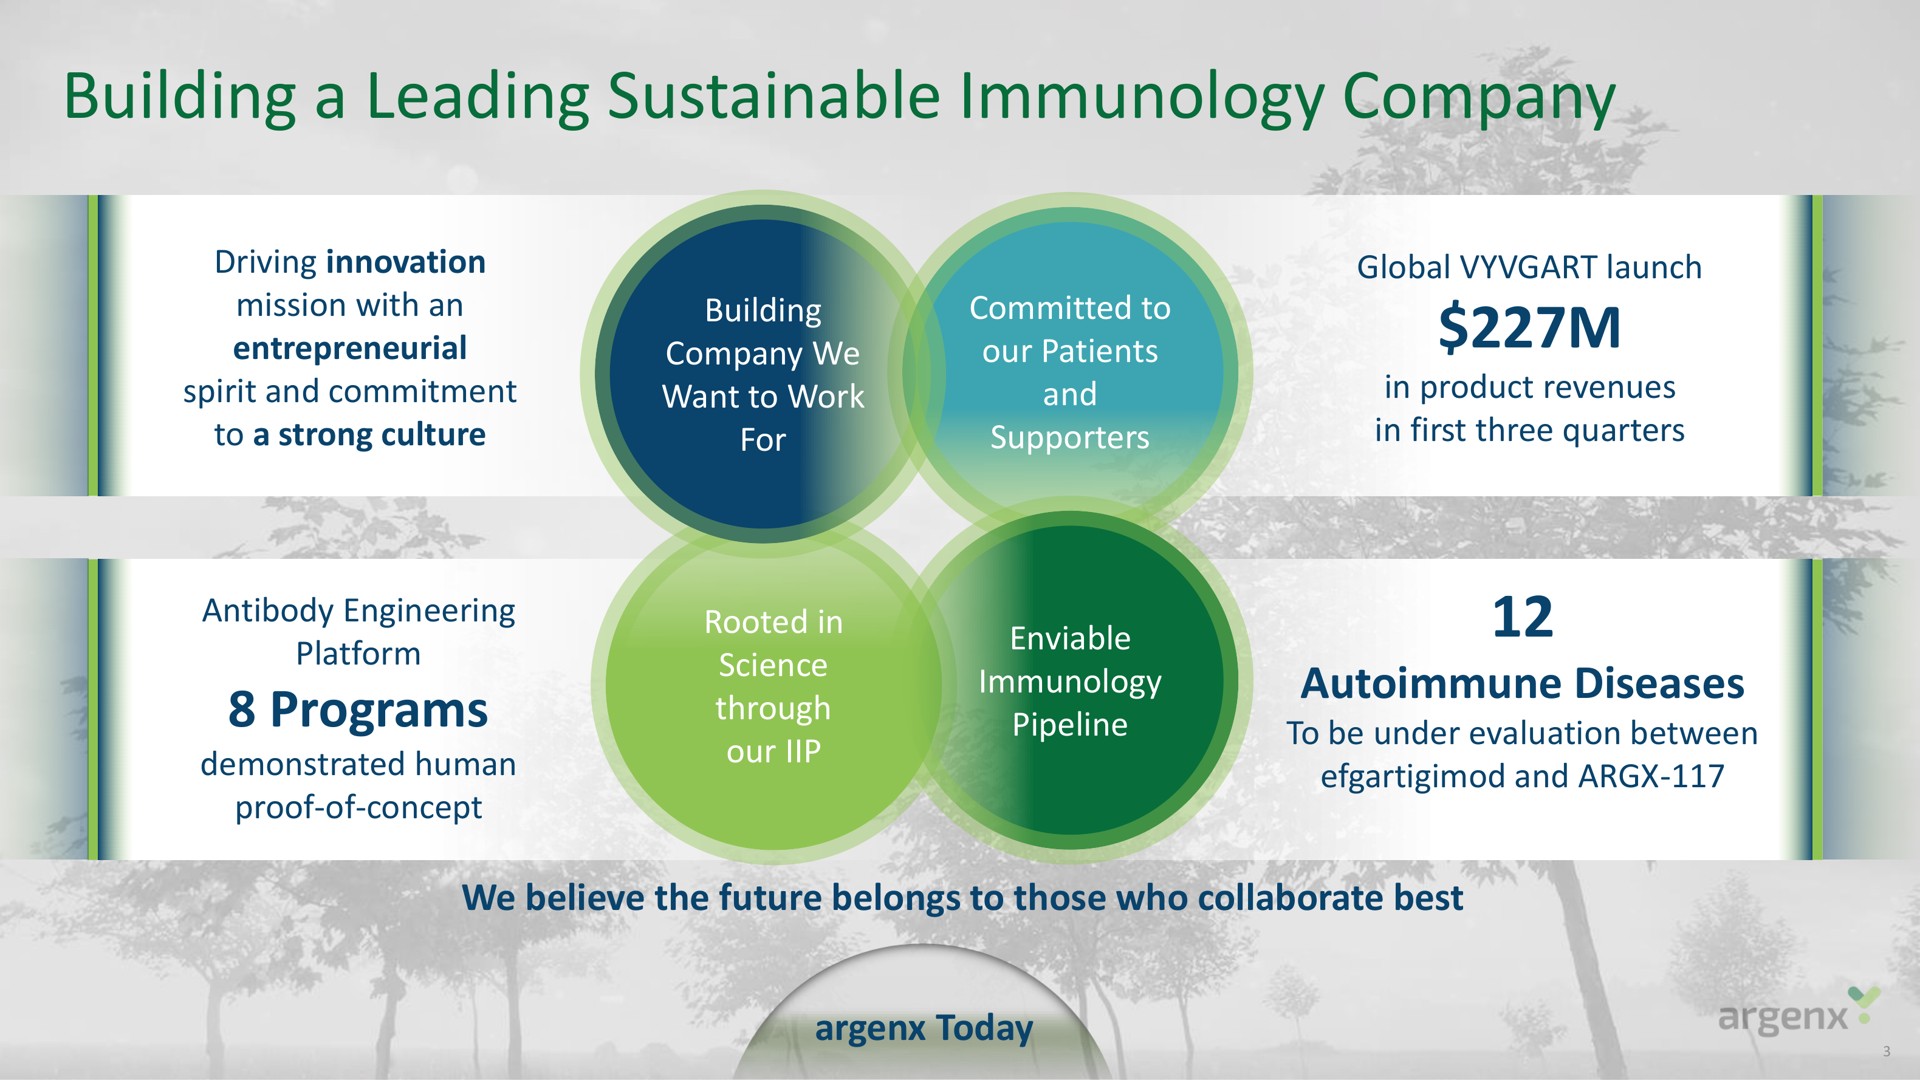 building a leading sustainable immunology company | argenx SE